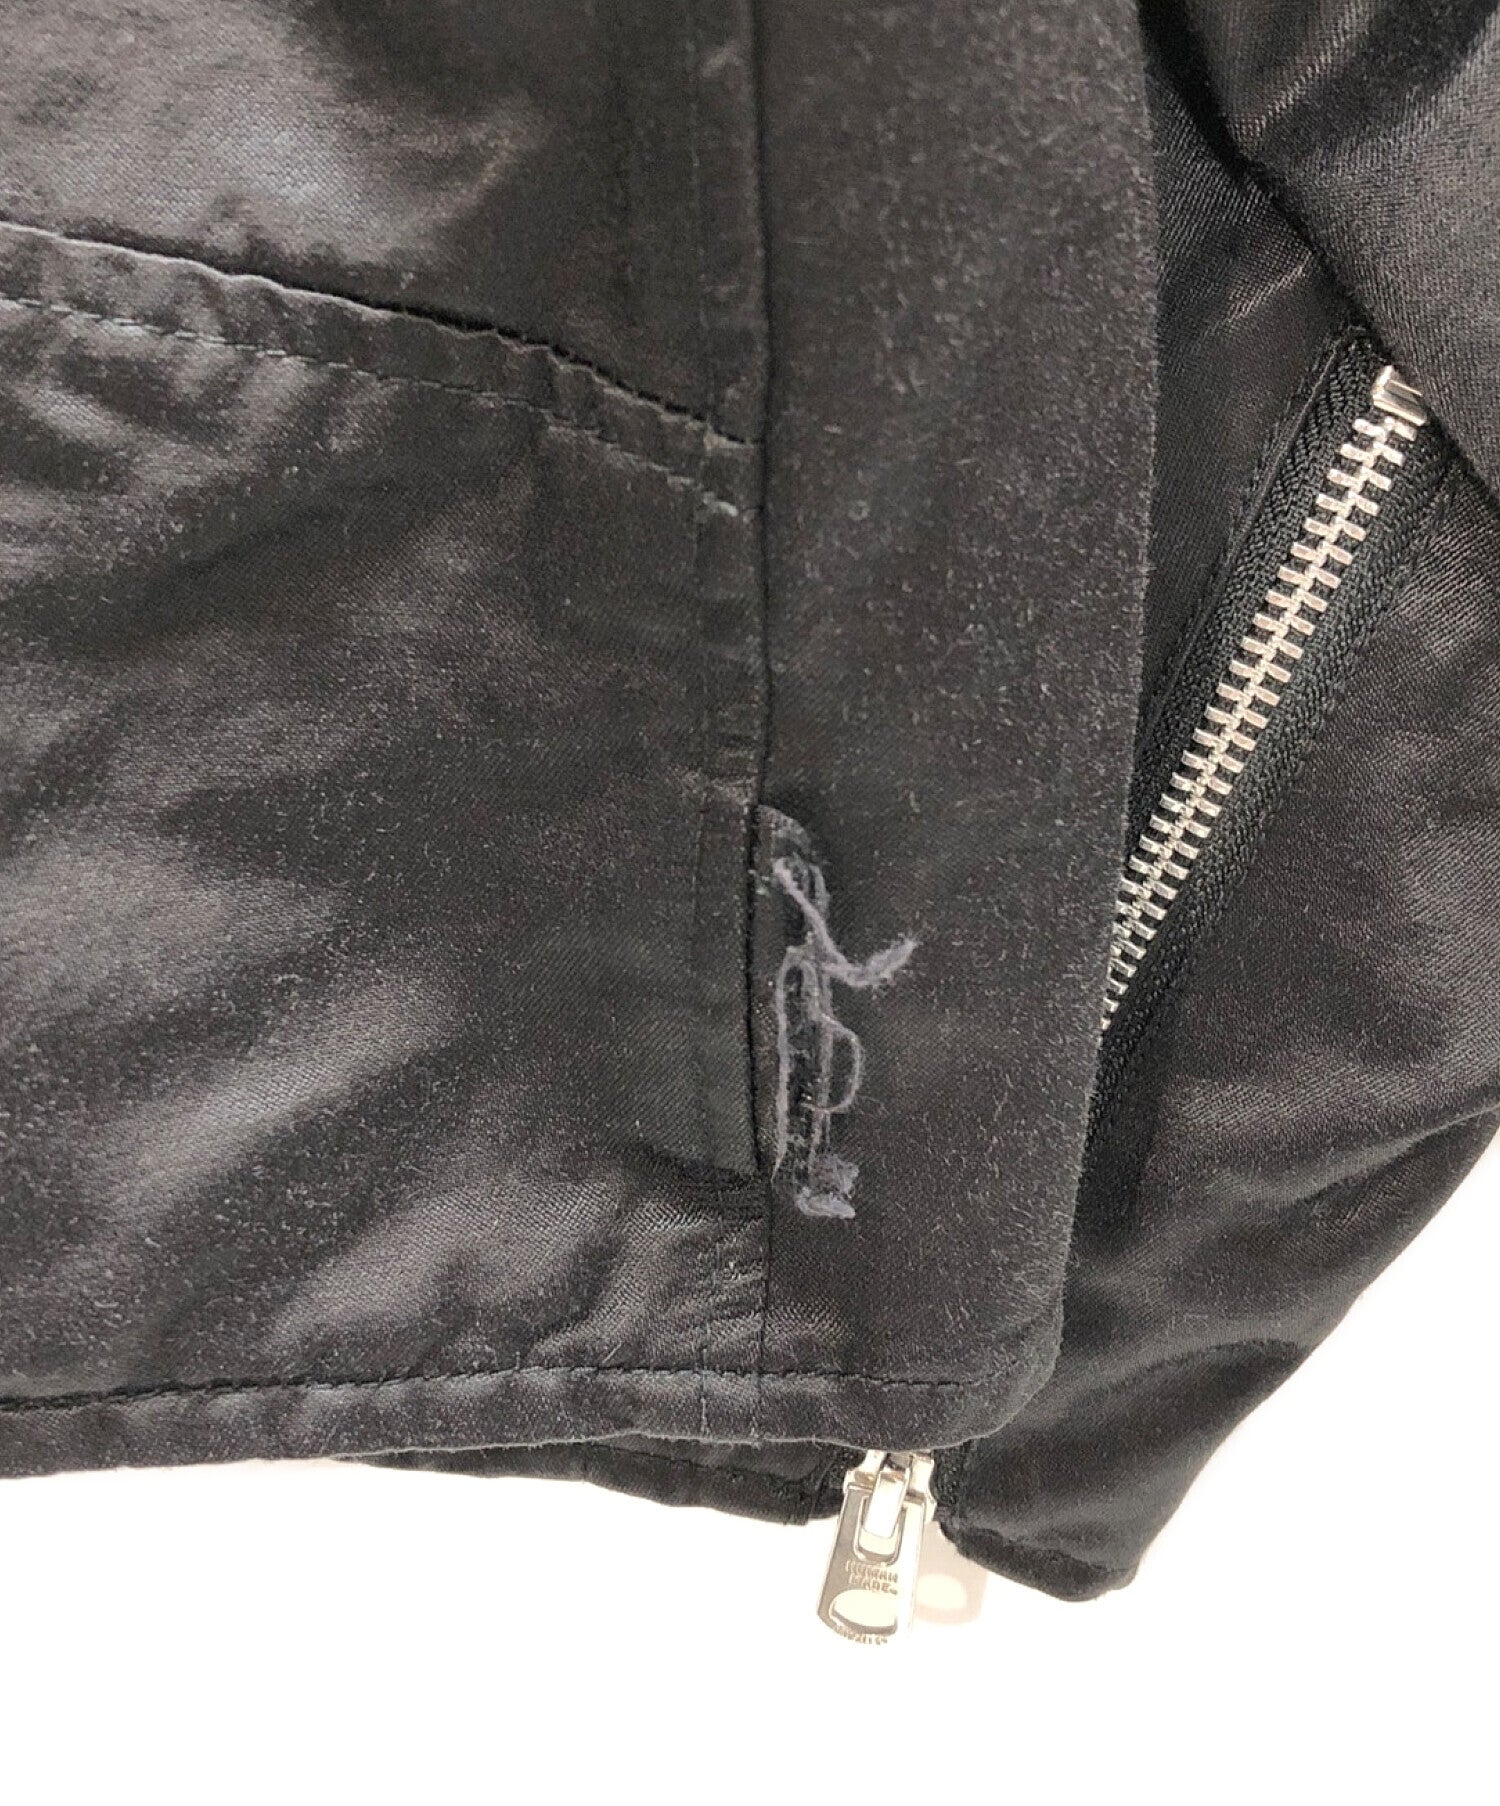 Archive Factory Human Made Riders Jacket